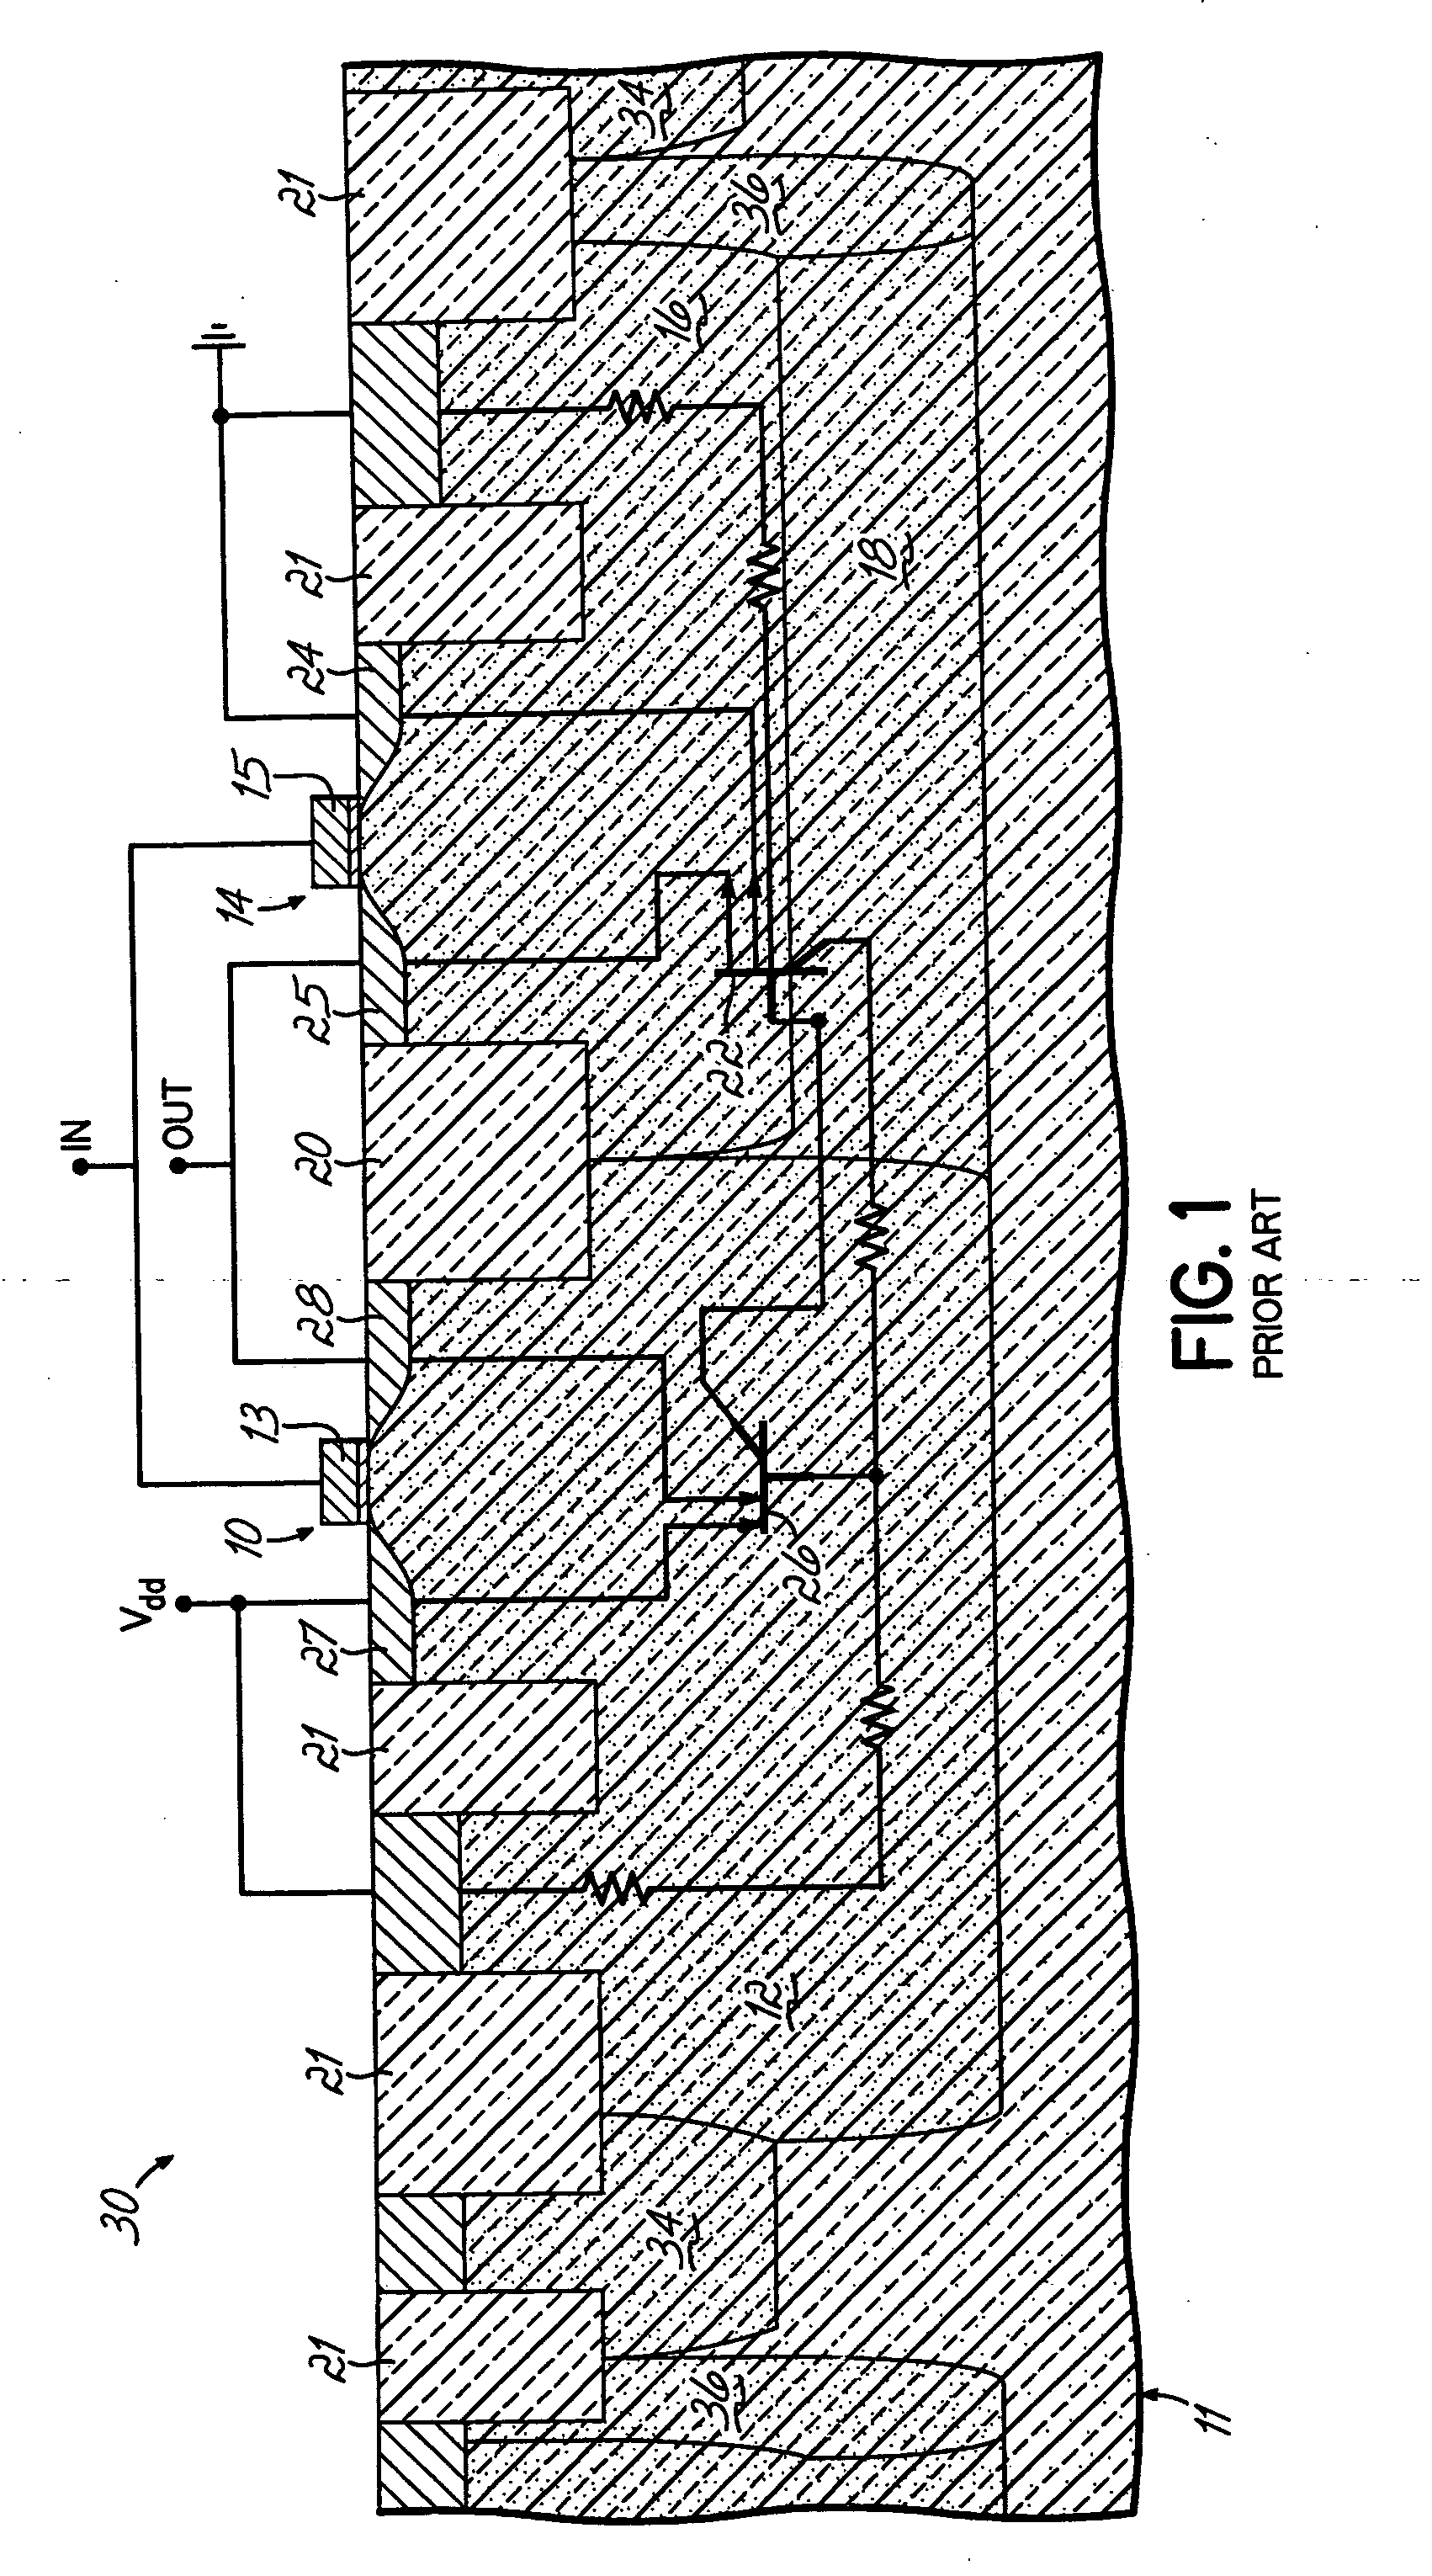 Methods and semiconductor structures for latch-up suppression using a buried conductive region